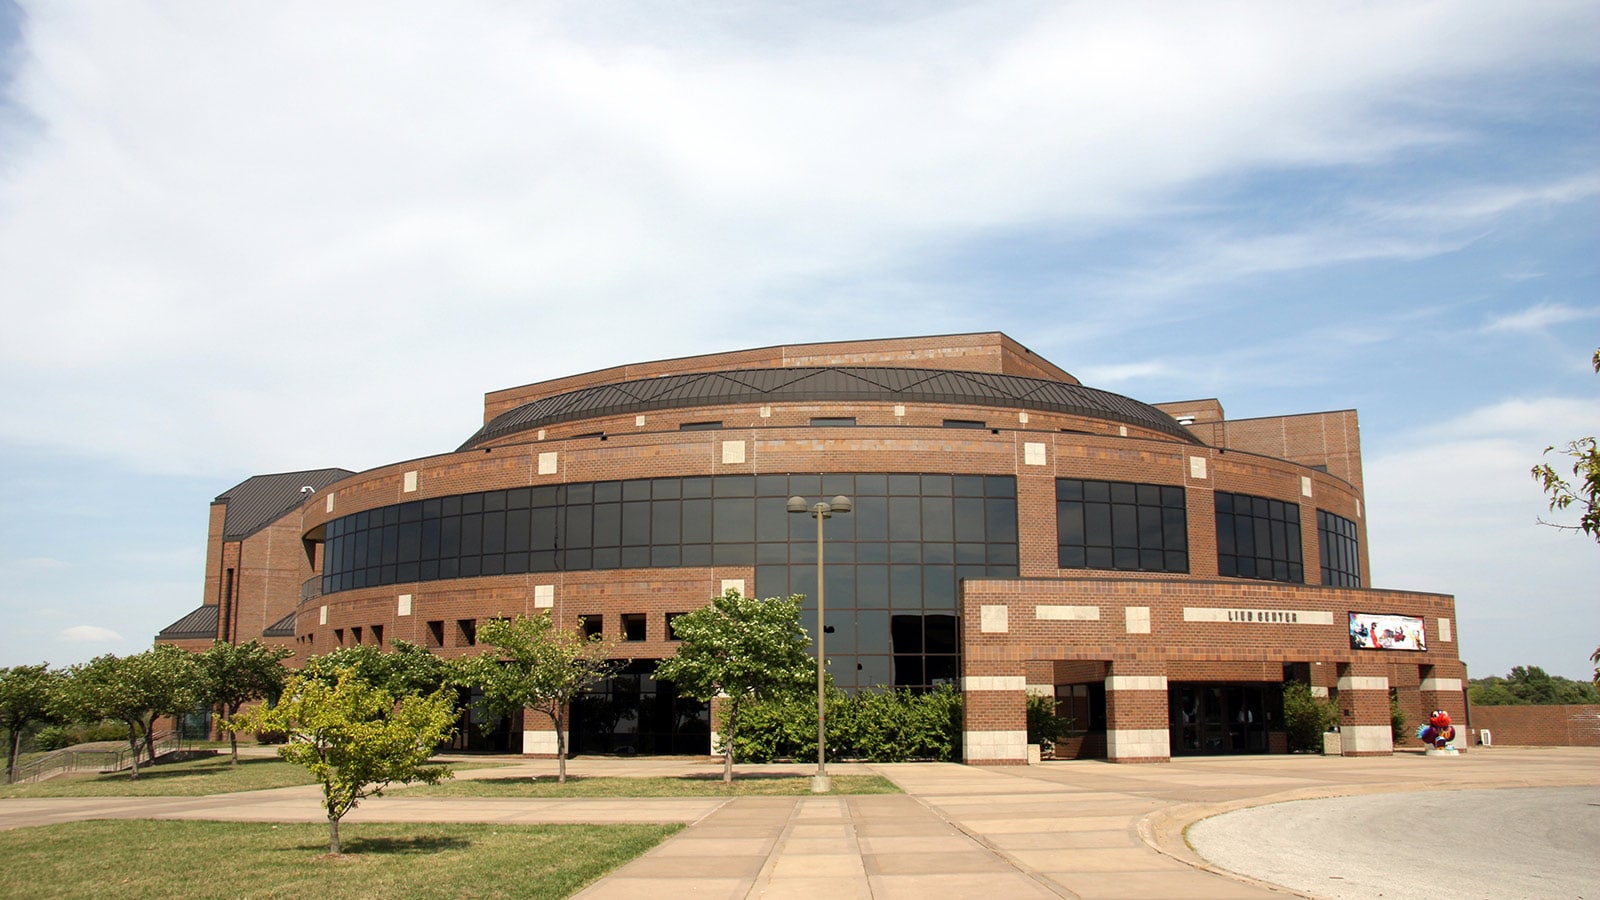 Meyer Sound Favored for Events Large or Small, Indoors or Out, at Lied Center of Kansas